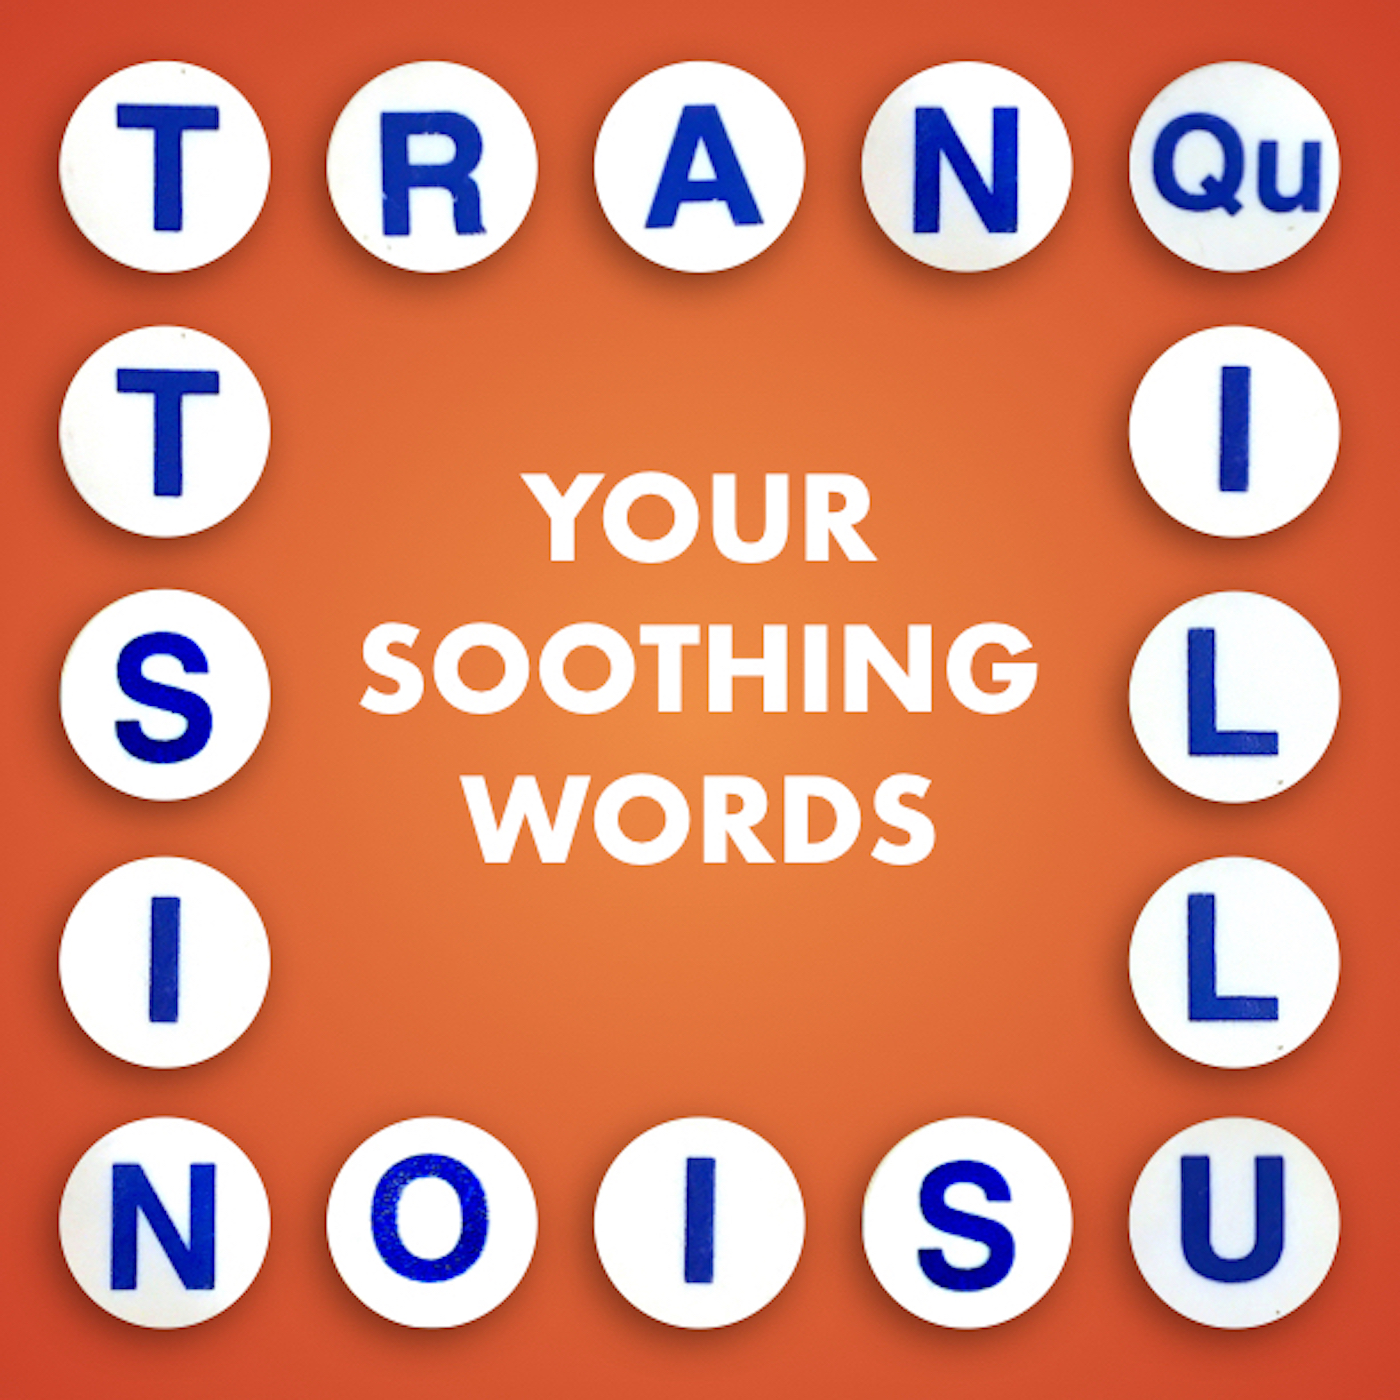 Thumbnail for "Tranquillusionist: Your Soothing Words".